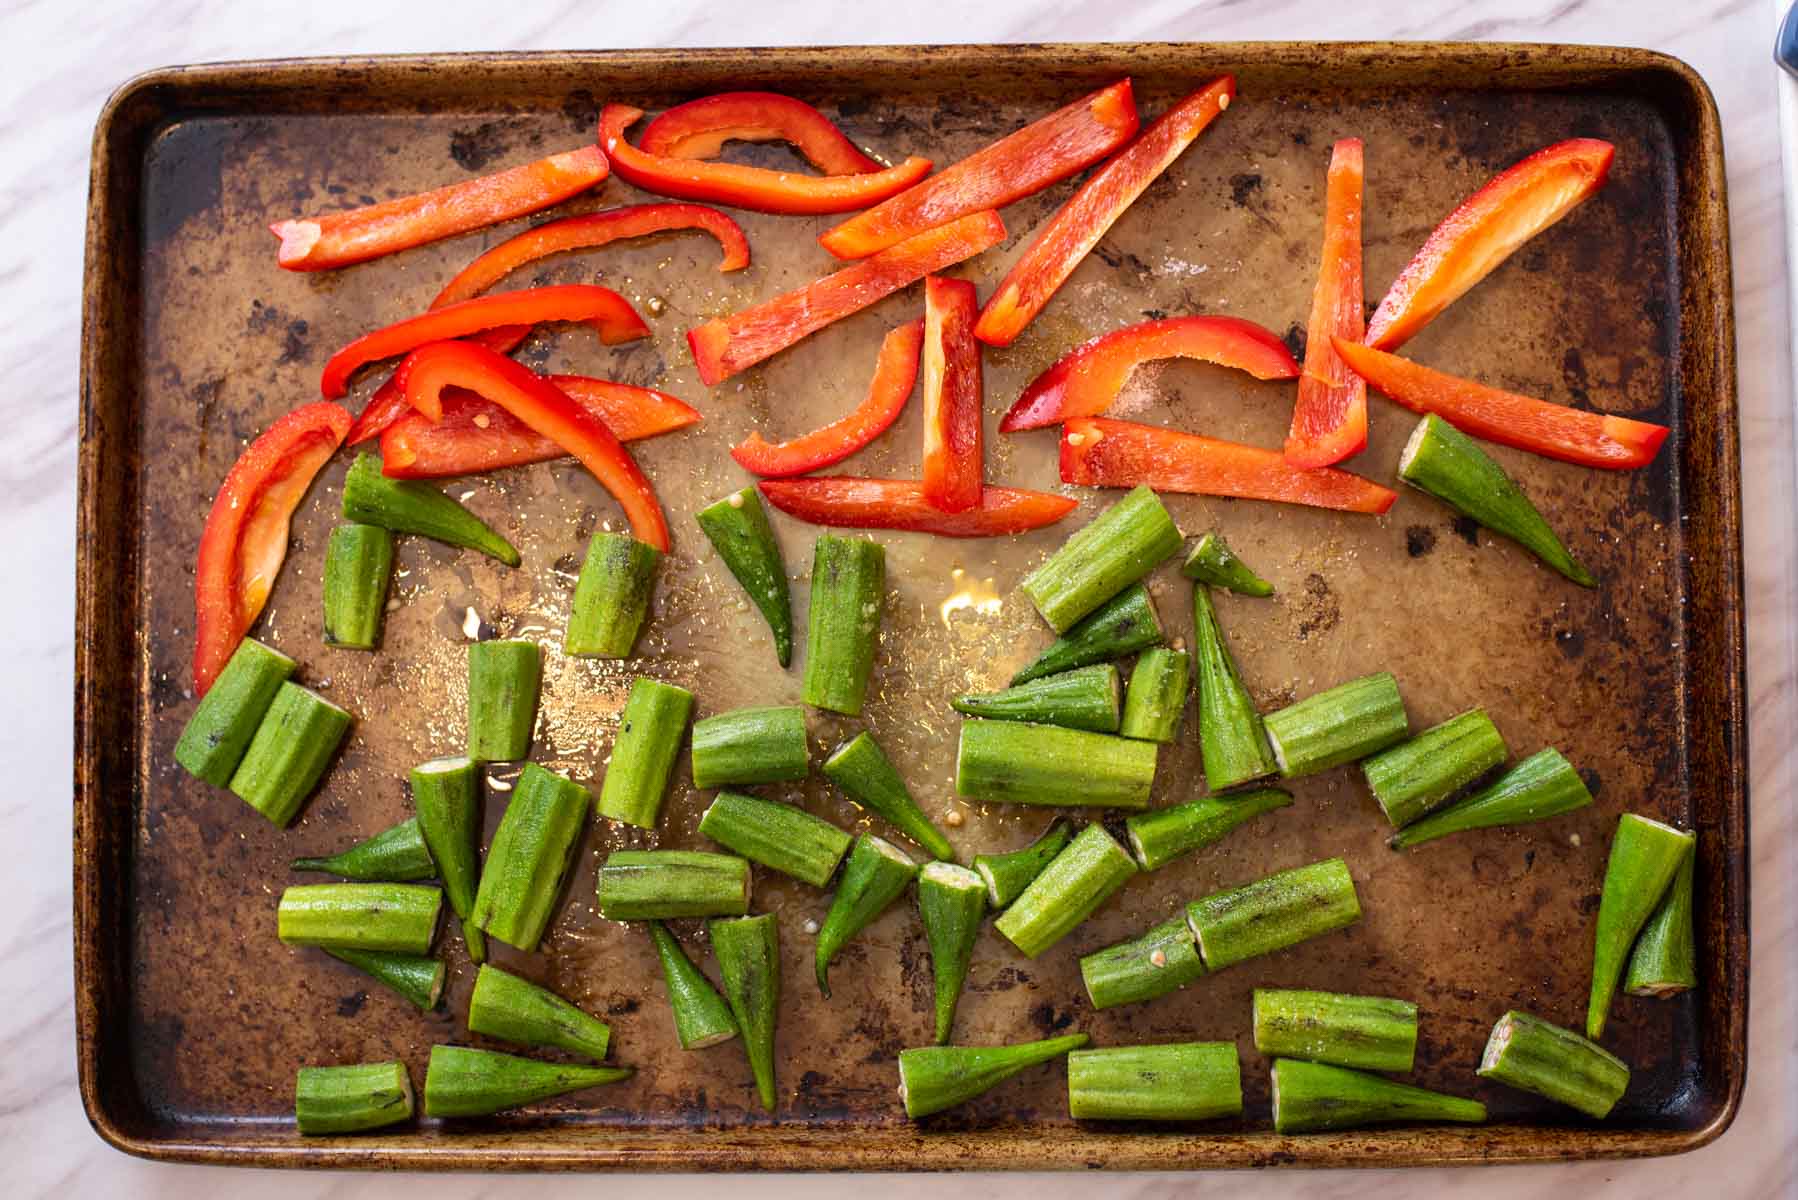 Red bell pepper strips and sliced okra on a sheet pan.